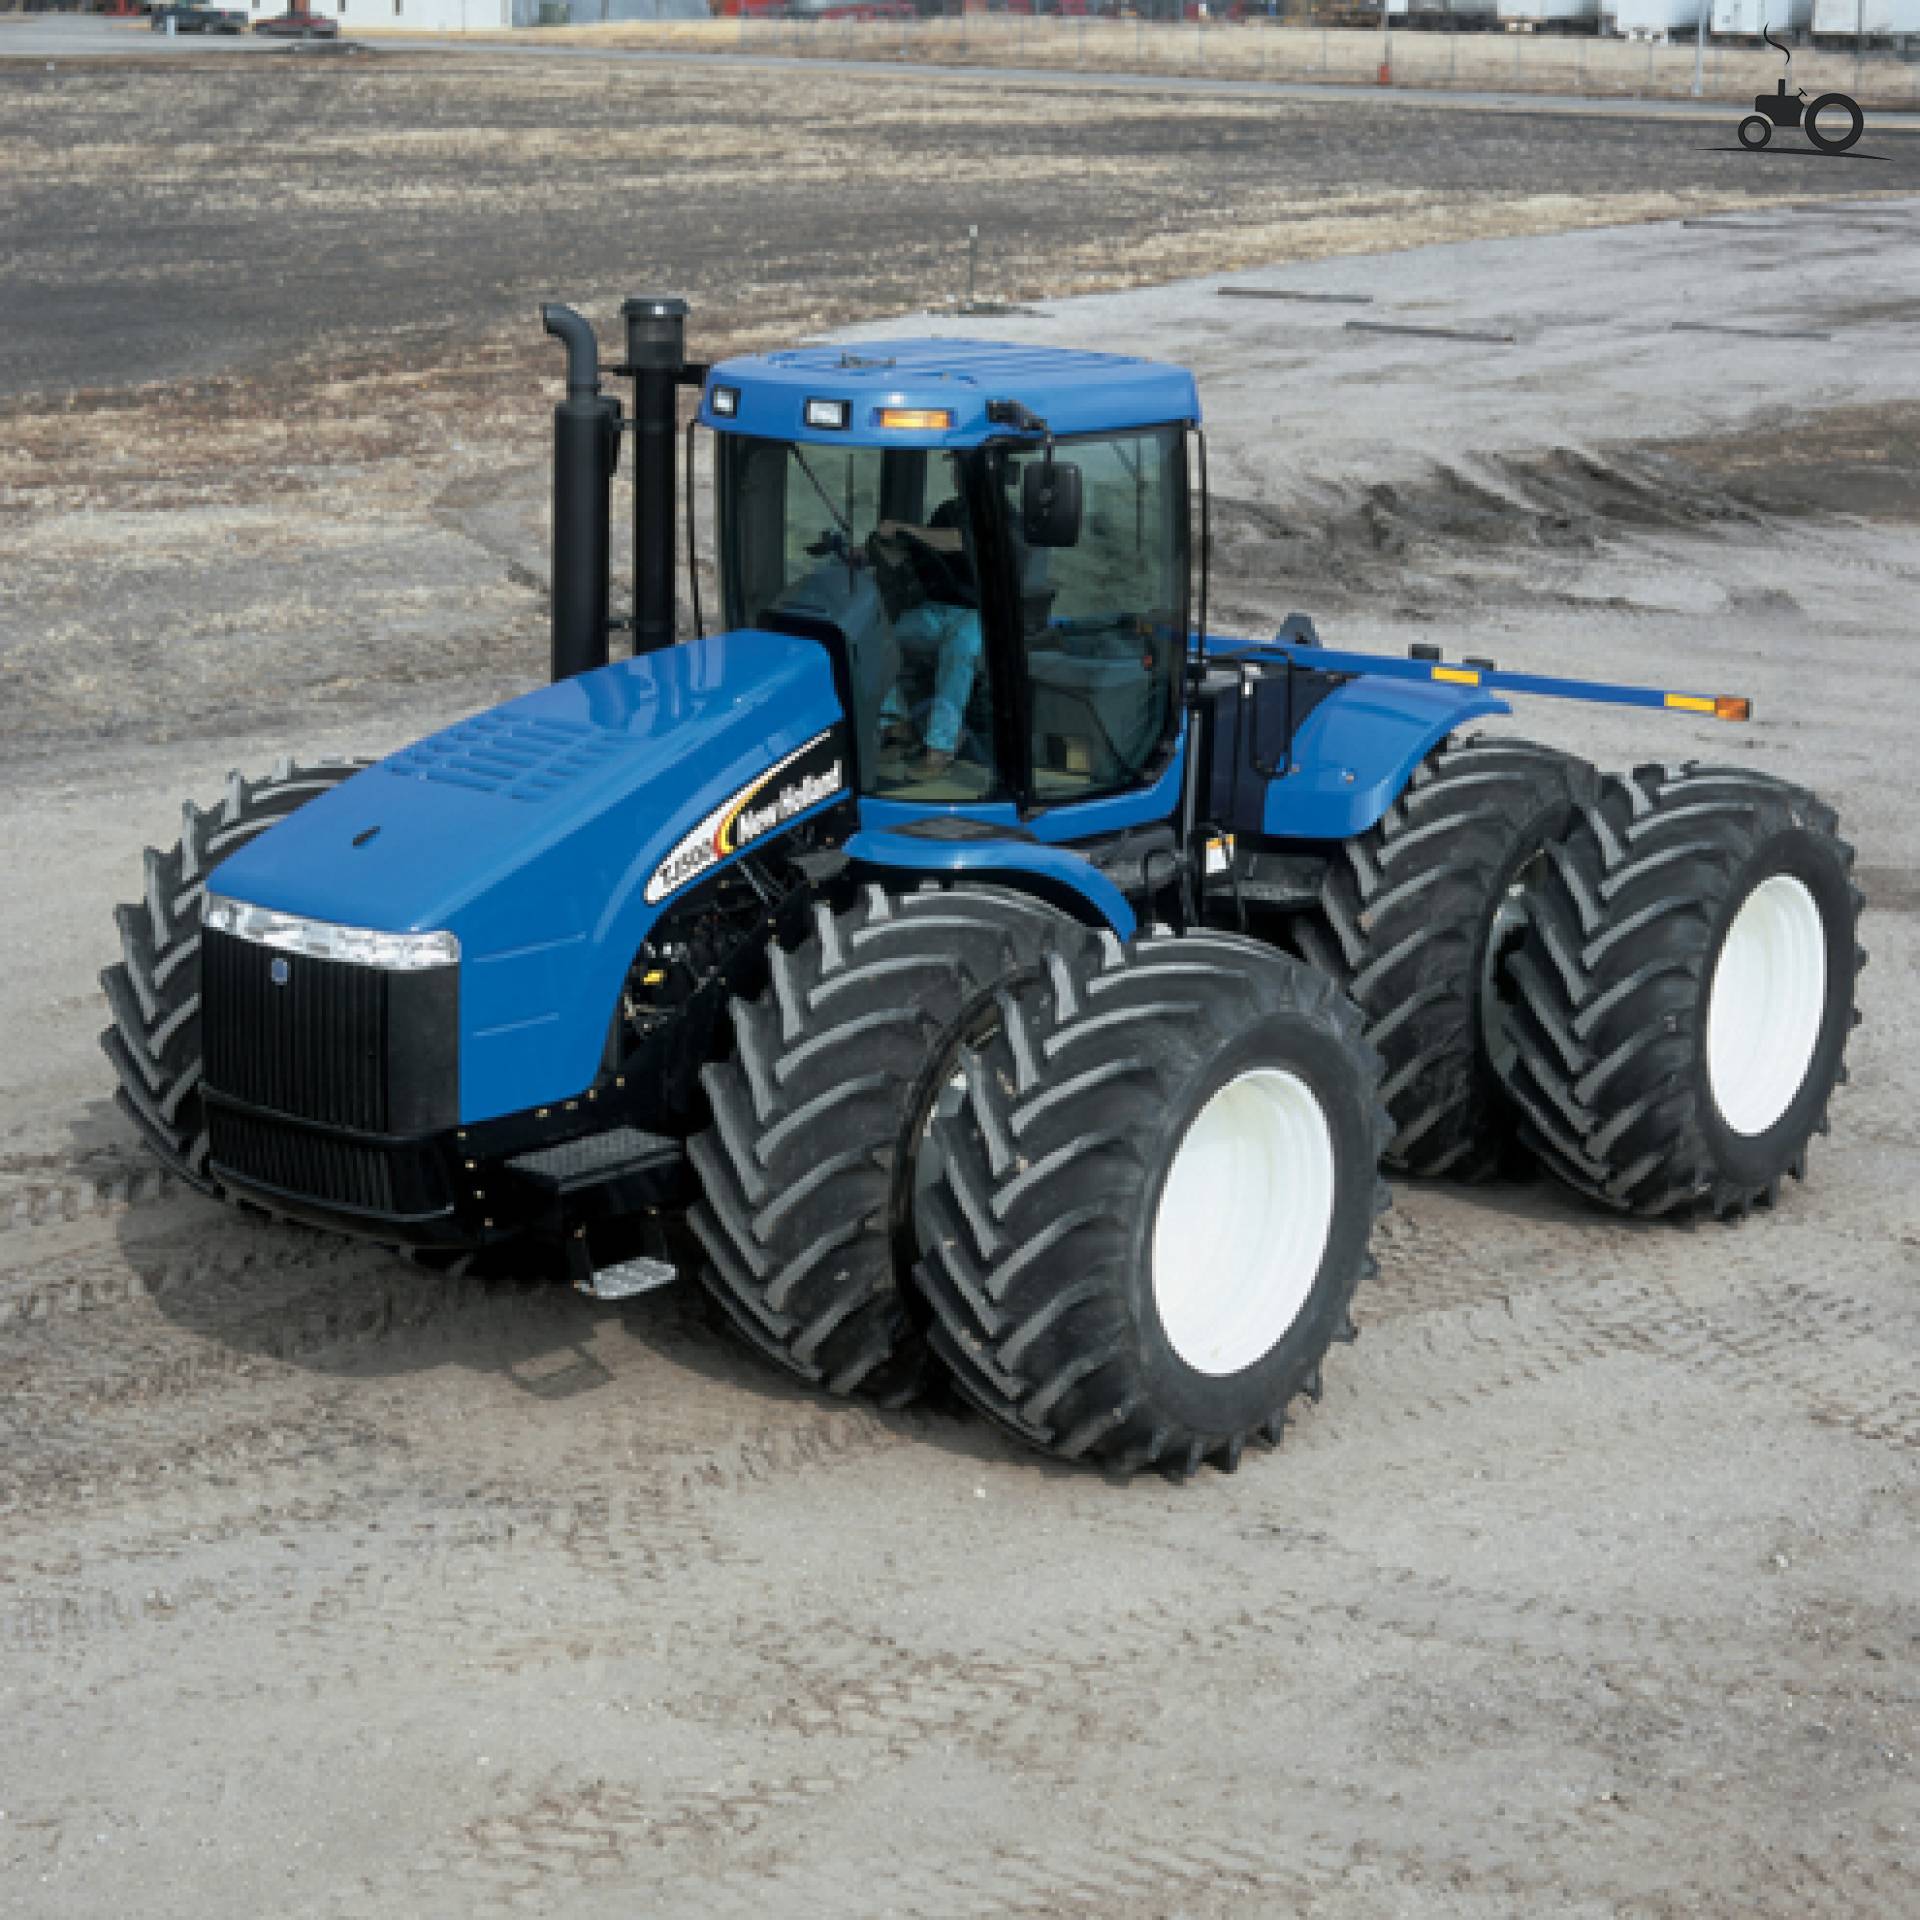 http://pictures.tractorfan.nl/groot/n/new-holland/8775-tj-500-new-holland.jpg